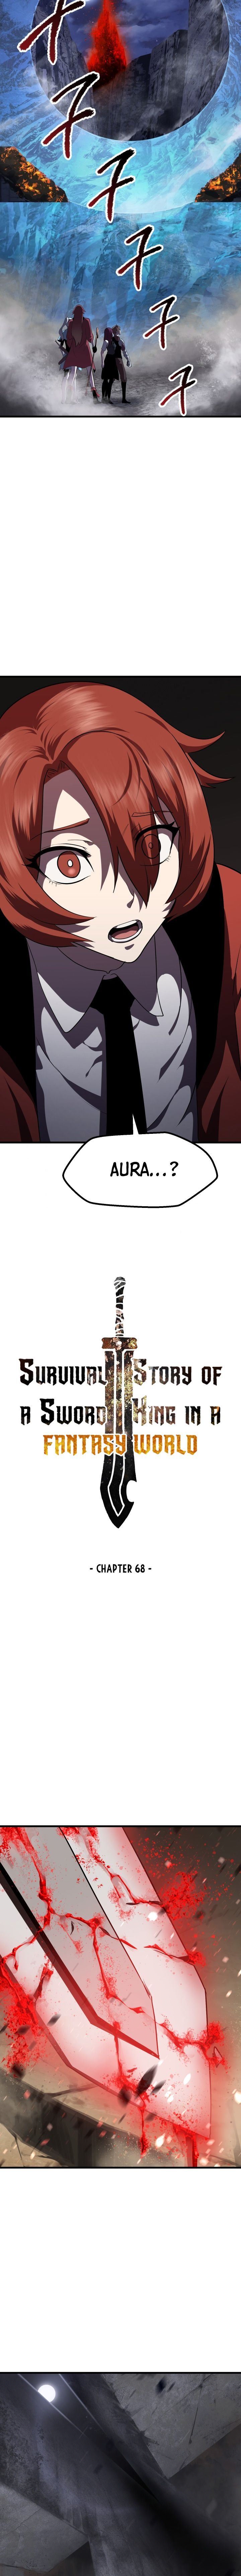 survival_story_of_a_sword_king_in_a_fantasy_world_68_5